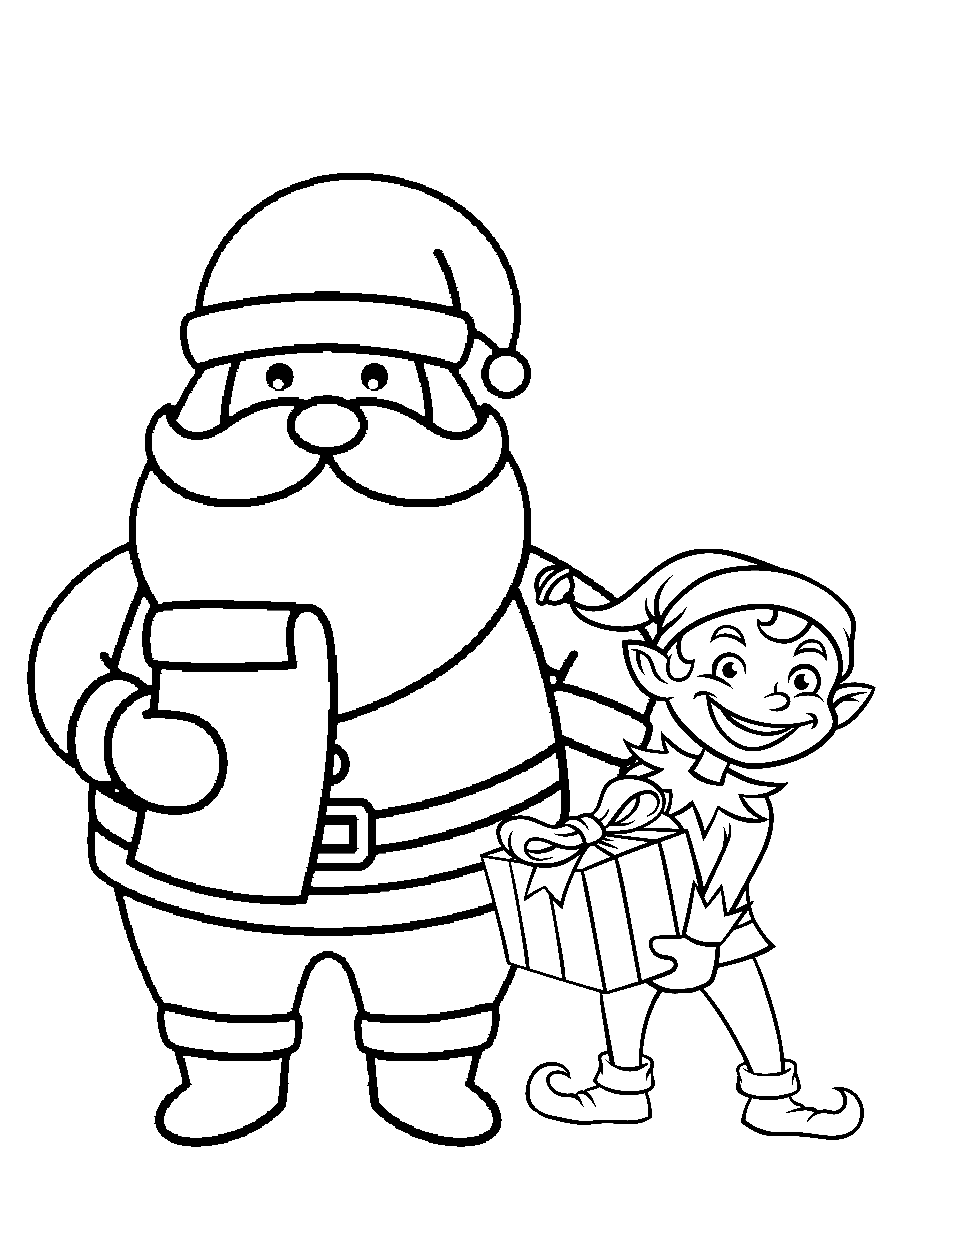 Santa and a Christmas Elf Coloring Page - An elf handing a gift to Santa for his sack.